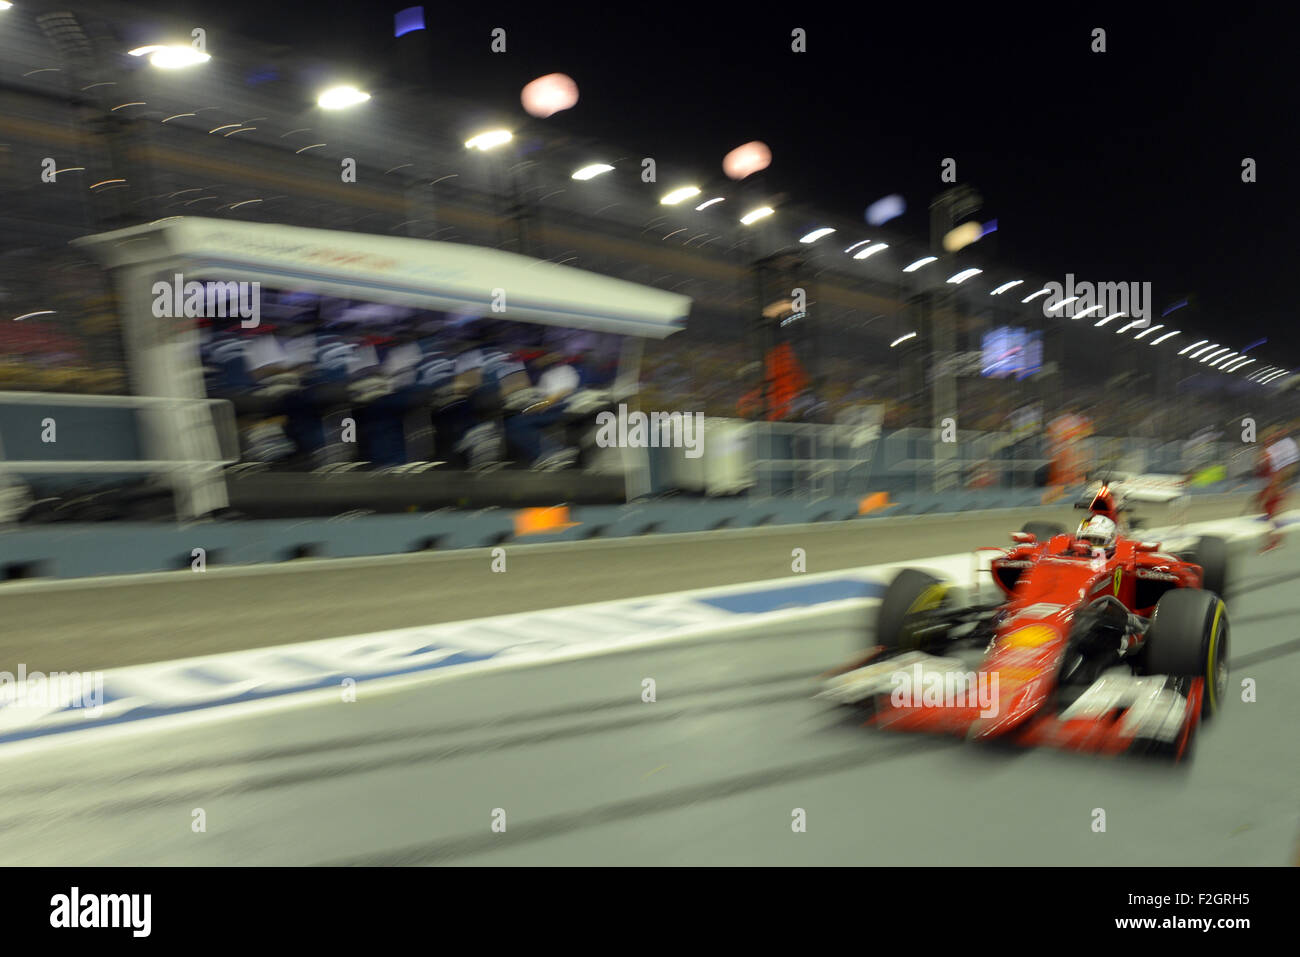 Singapore. 18th Sep, 2015. Team Ferrari driver Sebastian Vettel drives in the second practice during F1 Singapore Grand Prix Night Race in Singapore's Marina Bay Street Circuit, Sept. 18, 2015. © Then Chih Wey/Xinhua/Alamy Live News Stock Photo